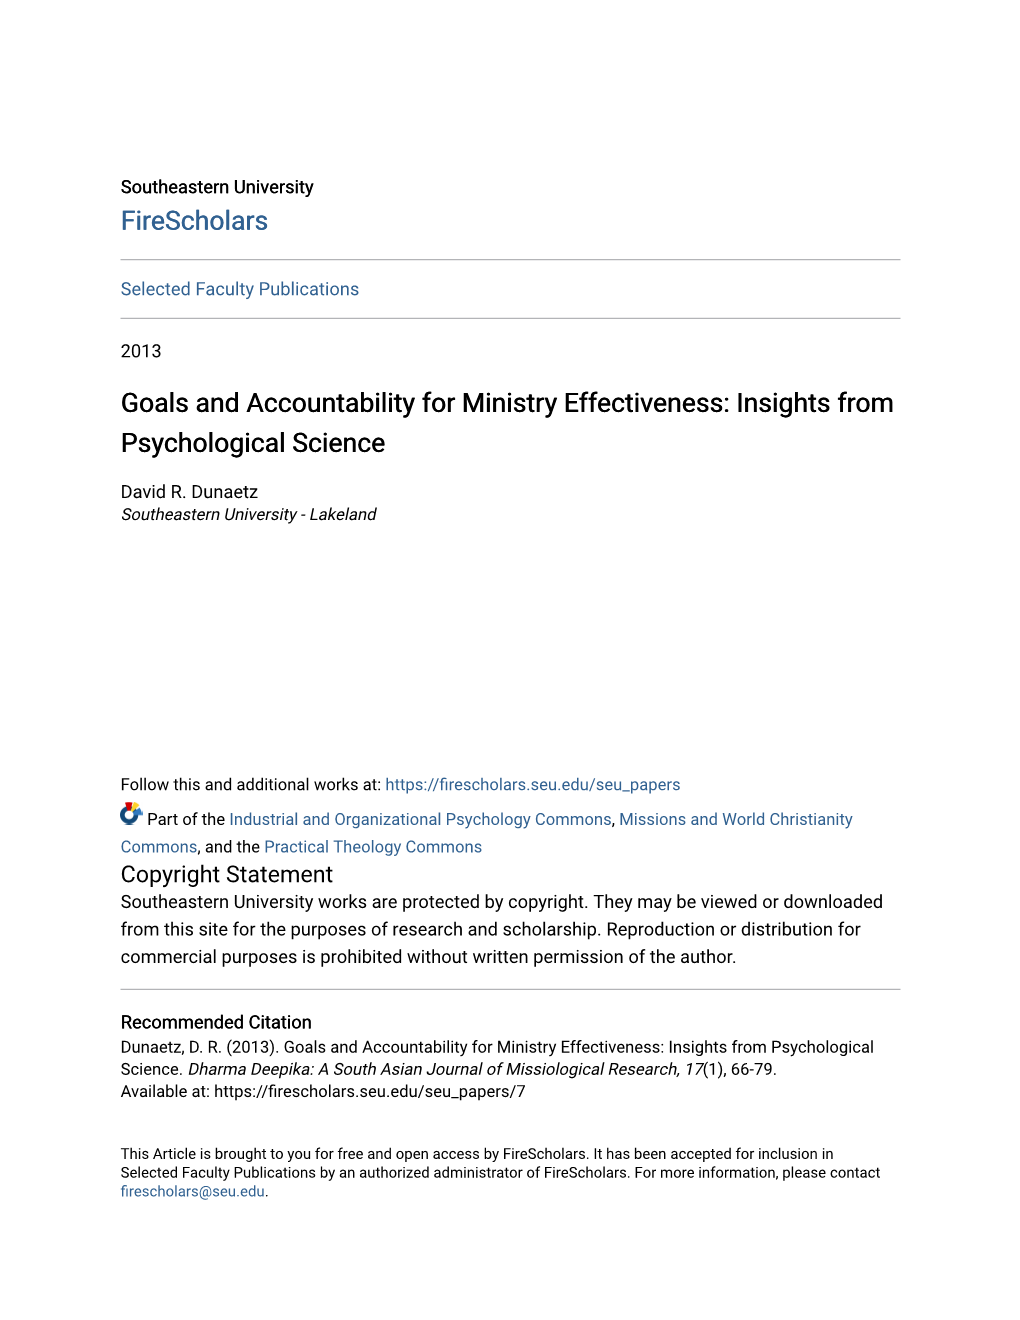 Goals and Accountability for Ministry Effectiveness: Insights from Psychological Science